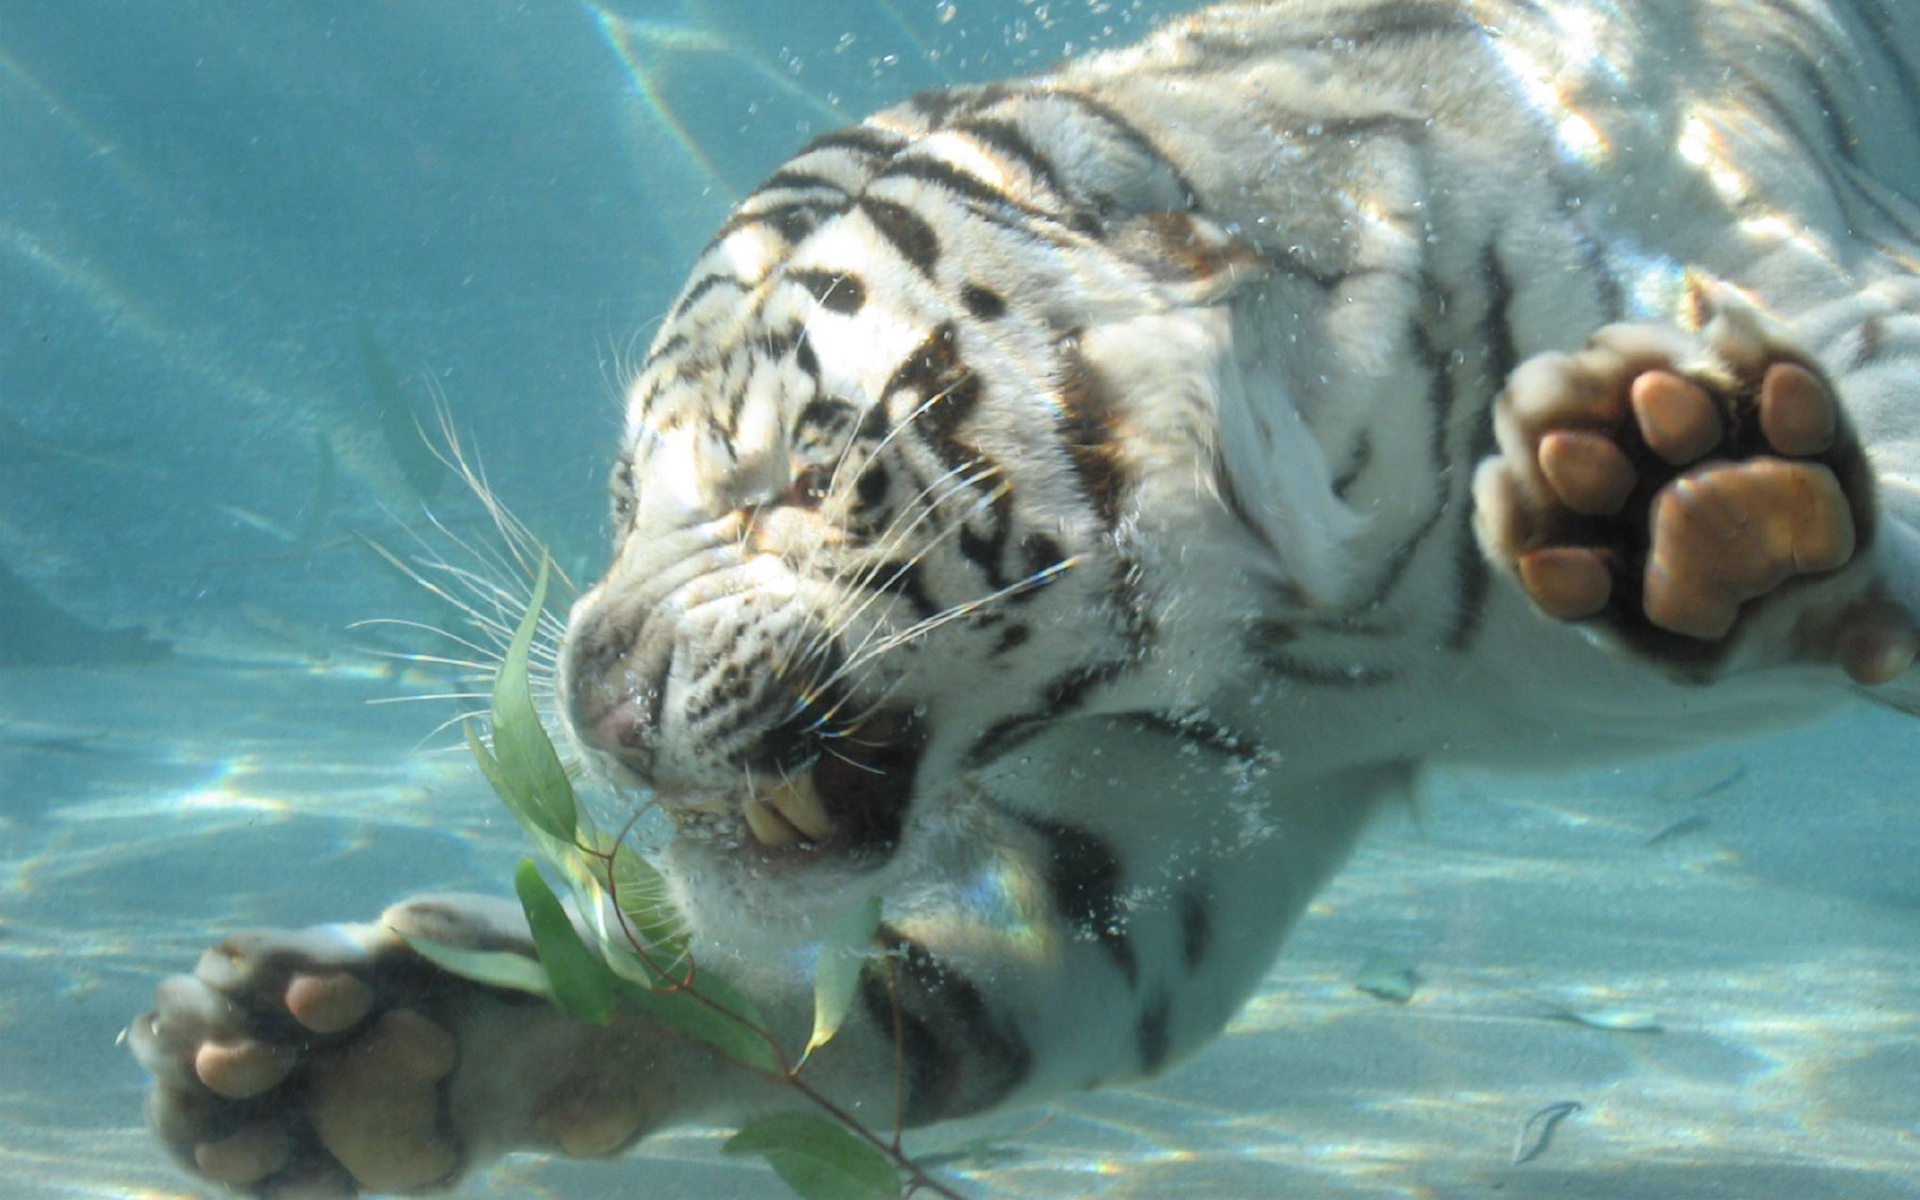 Tiger under water wallpapers and images   wallpapers